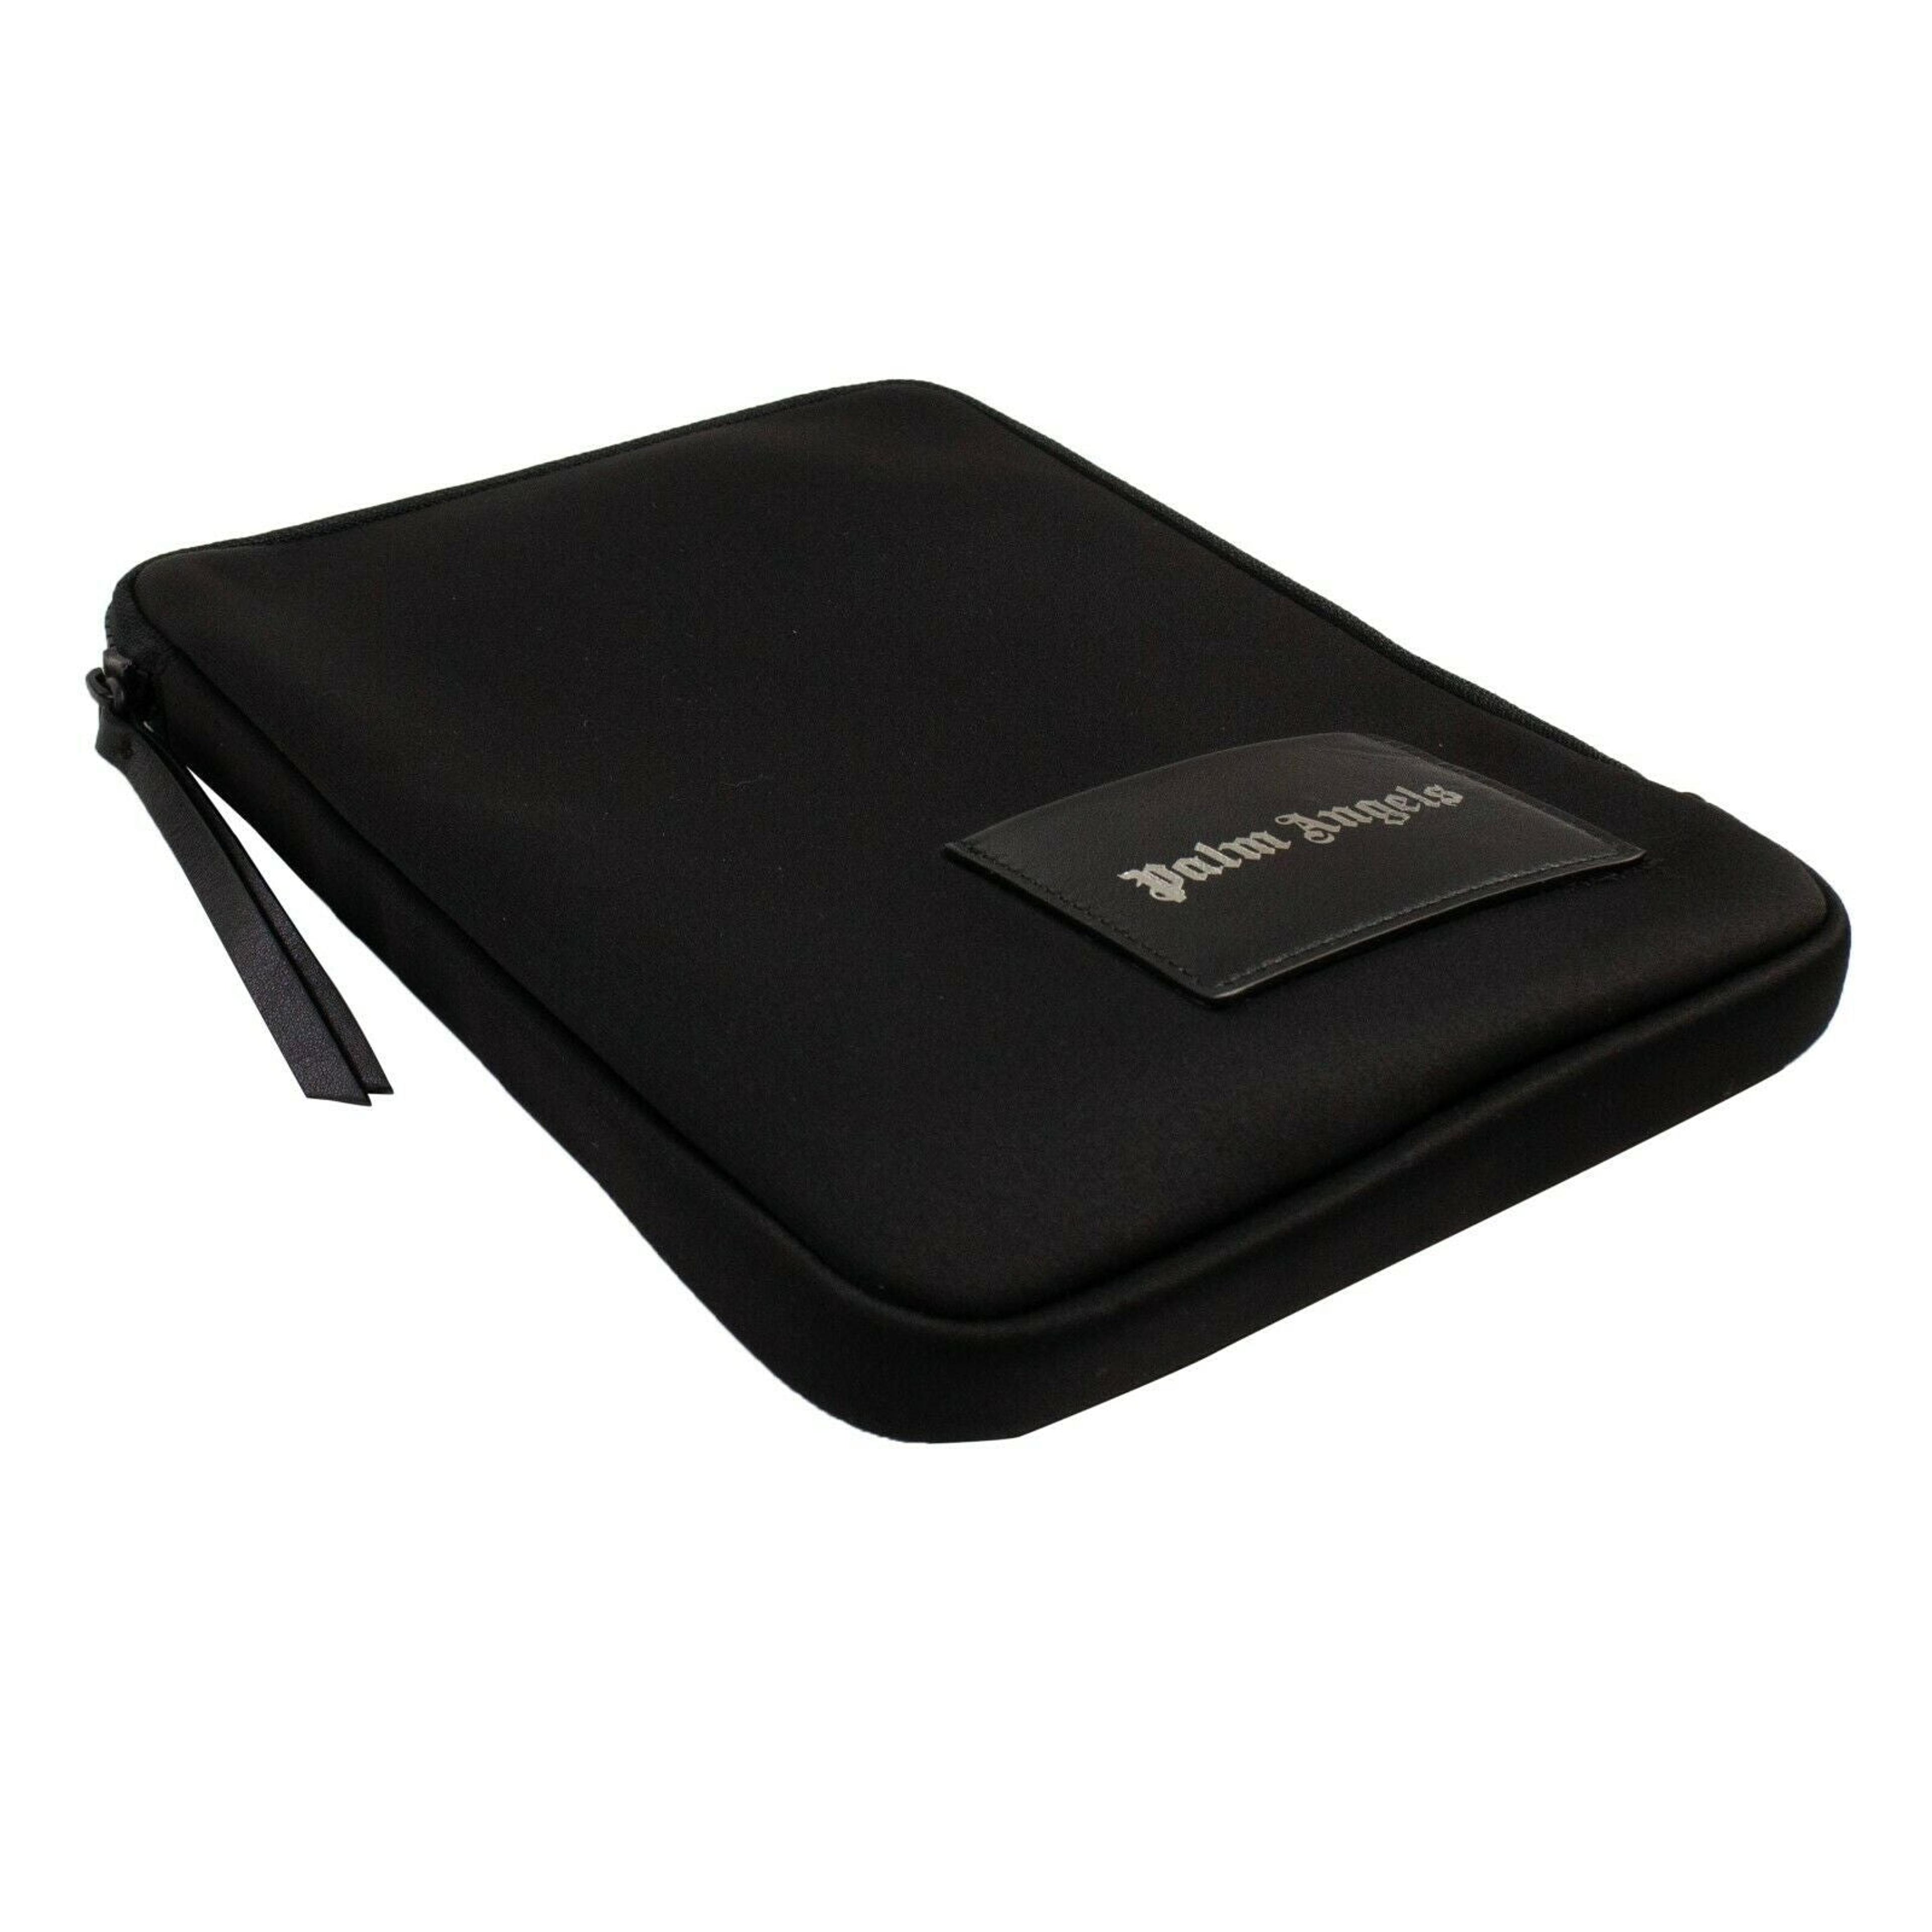 Alternate View 2 of Black Logo Patch IPad Case Pouch